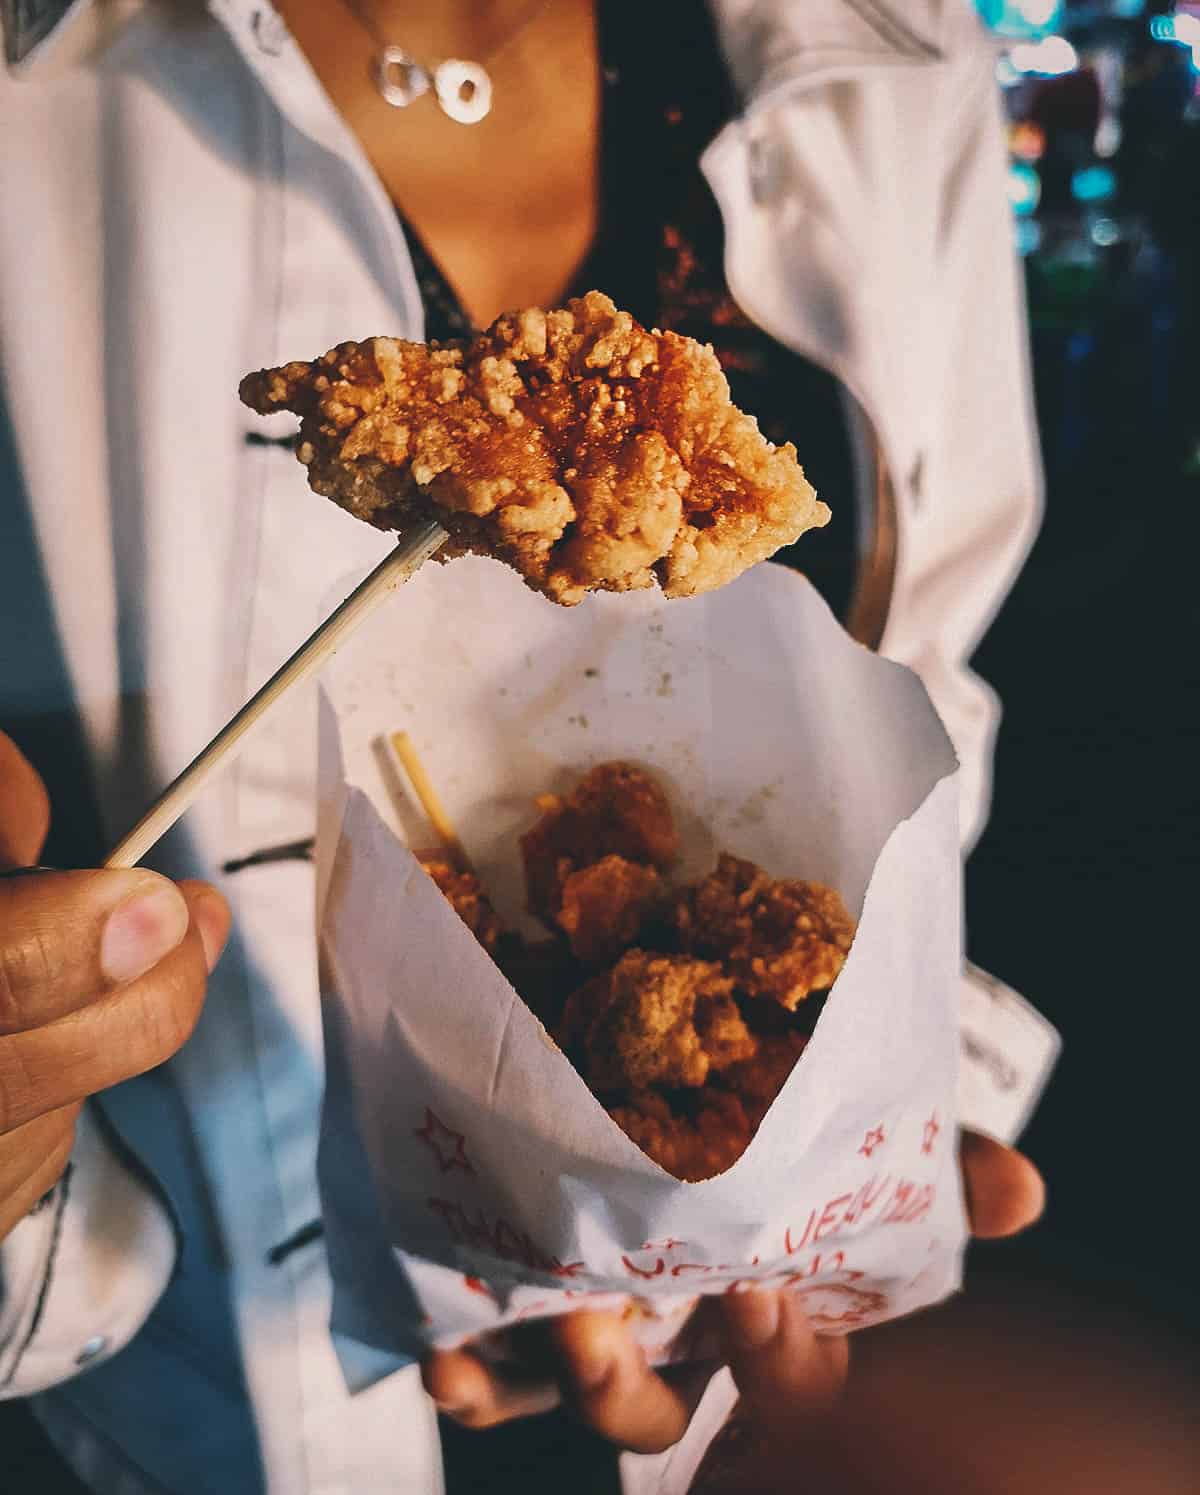 Fried chicken nuggets at Liouhe Night Market in Kaohsiung, Taiwan